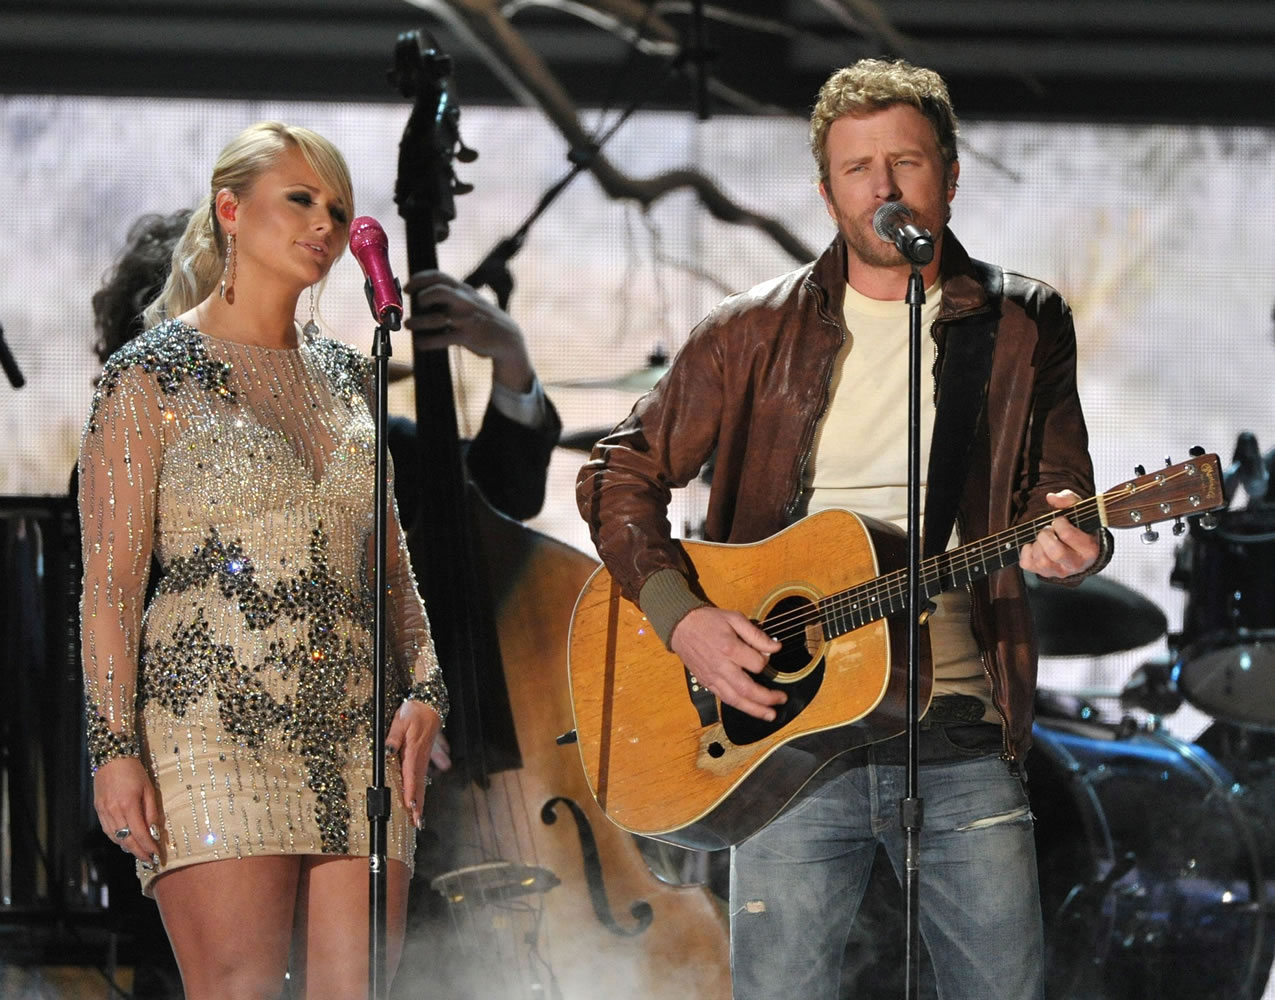 Invision files
Miranda Lambert, left, and Dierks Bentley perform at the 55th annual Grammy Awards in Los Angeles. Bentley says there won't be any hard feelings if childhood friend Miranda Lambert takes home the Grammy for best country album.